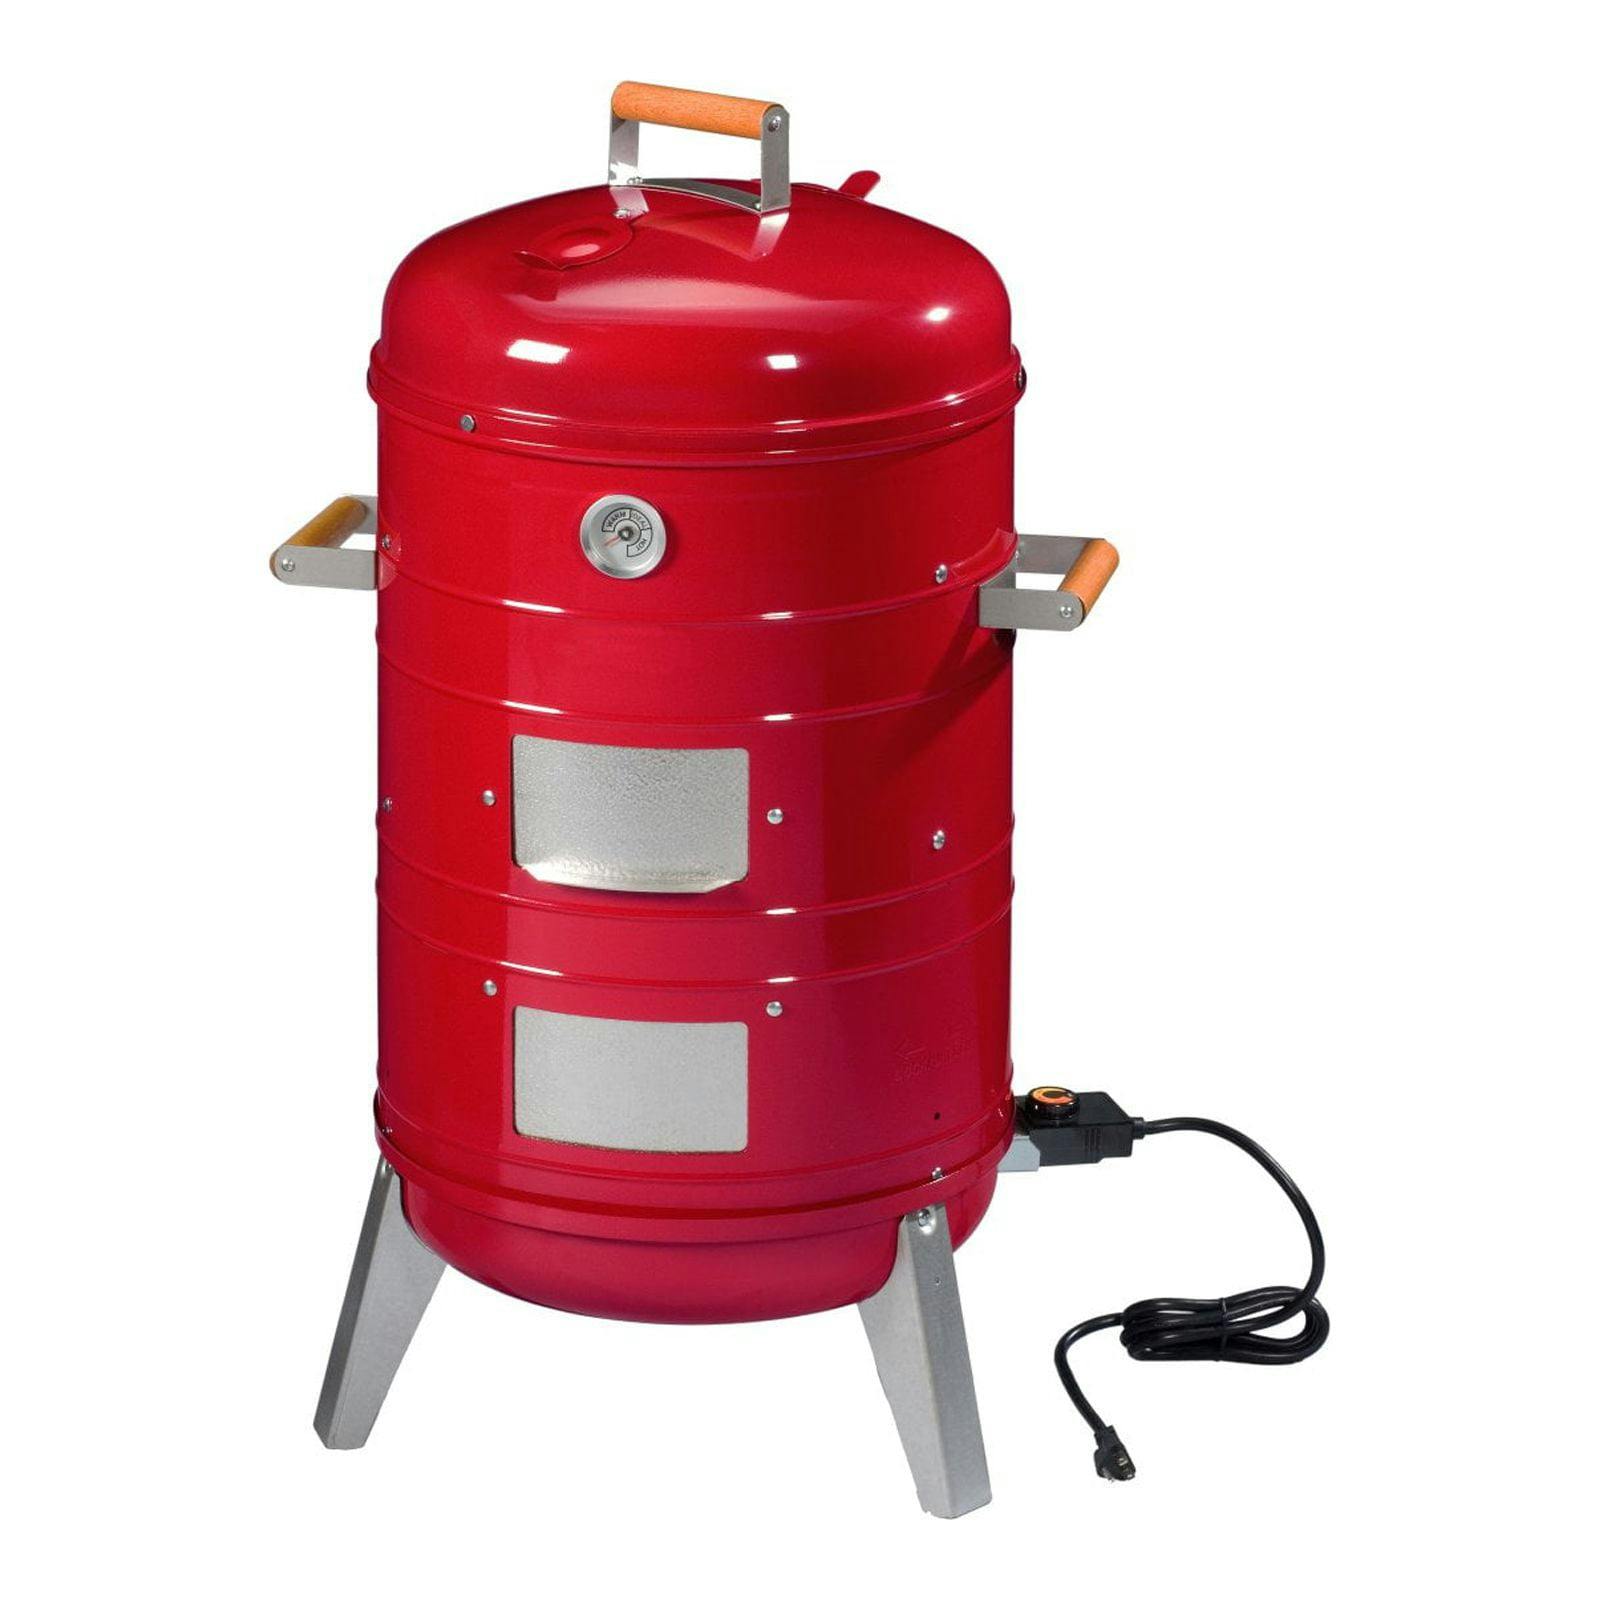 Americana 4-in-1 Electric/Charcoal Portable Water Smoker and Grill, 18" Red